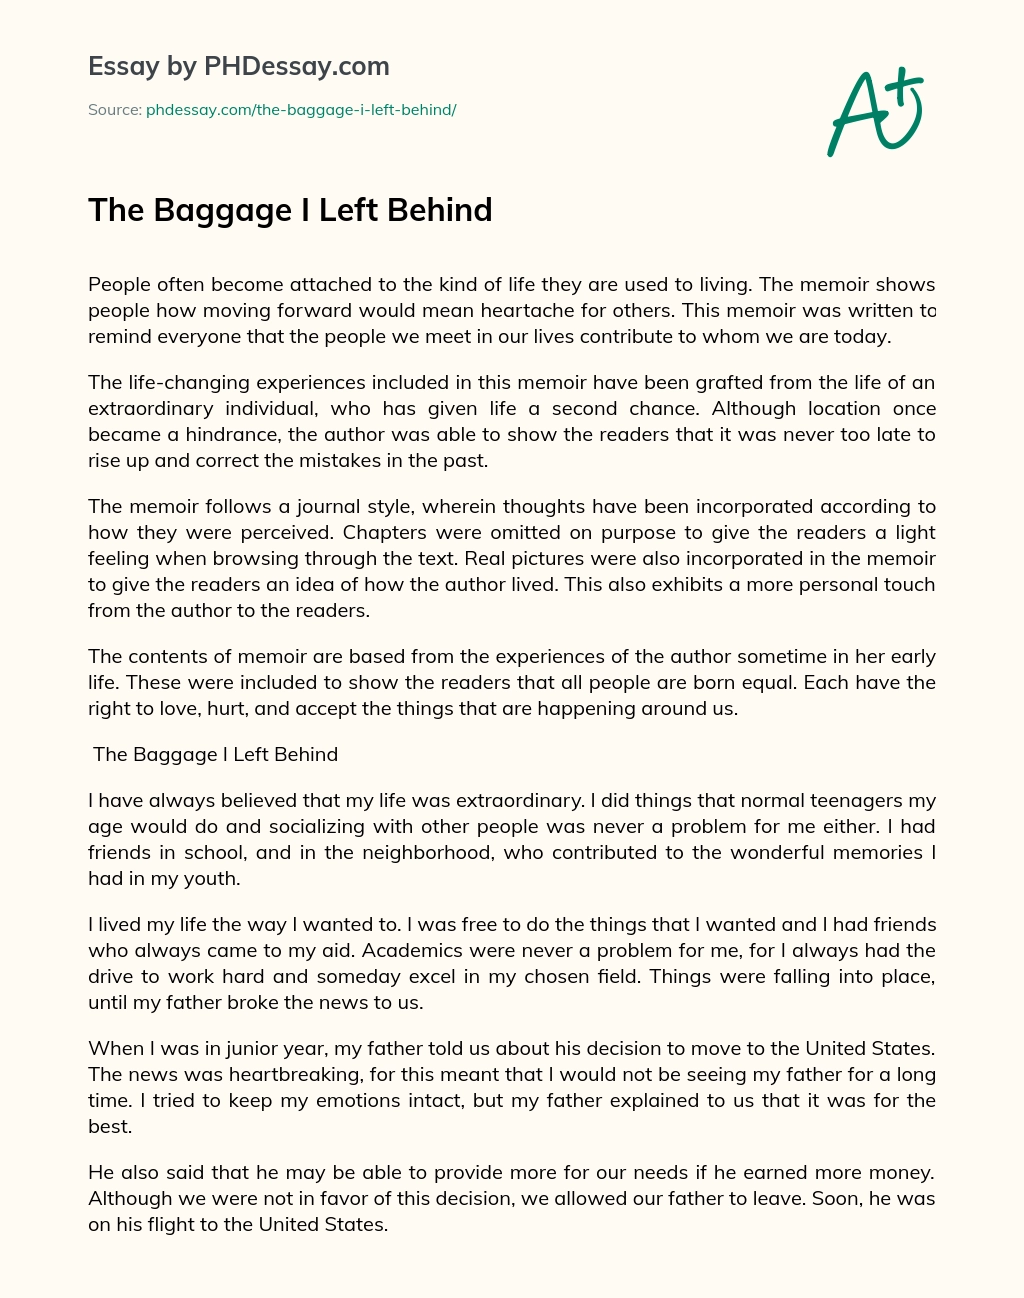 The Baggage I Left Behind essay